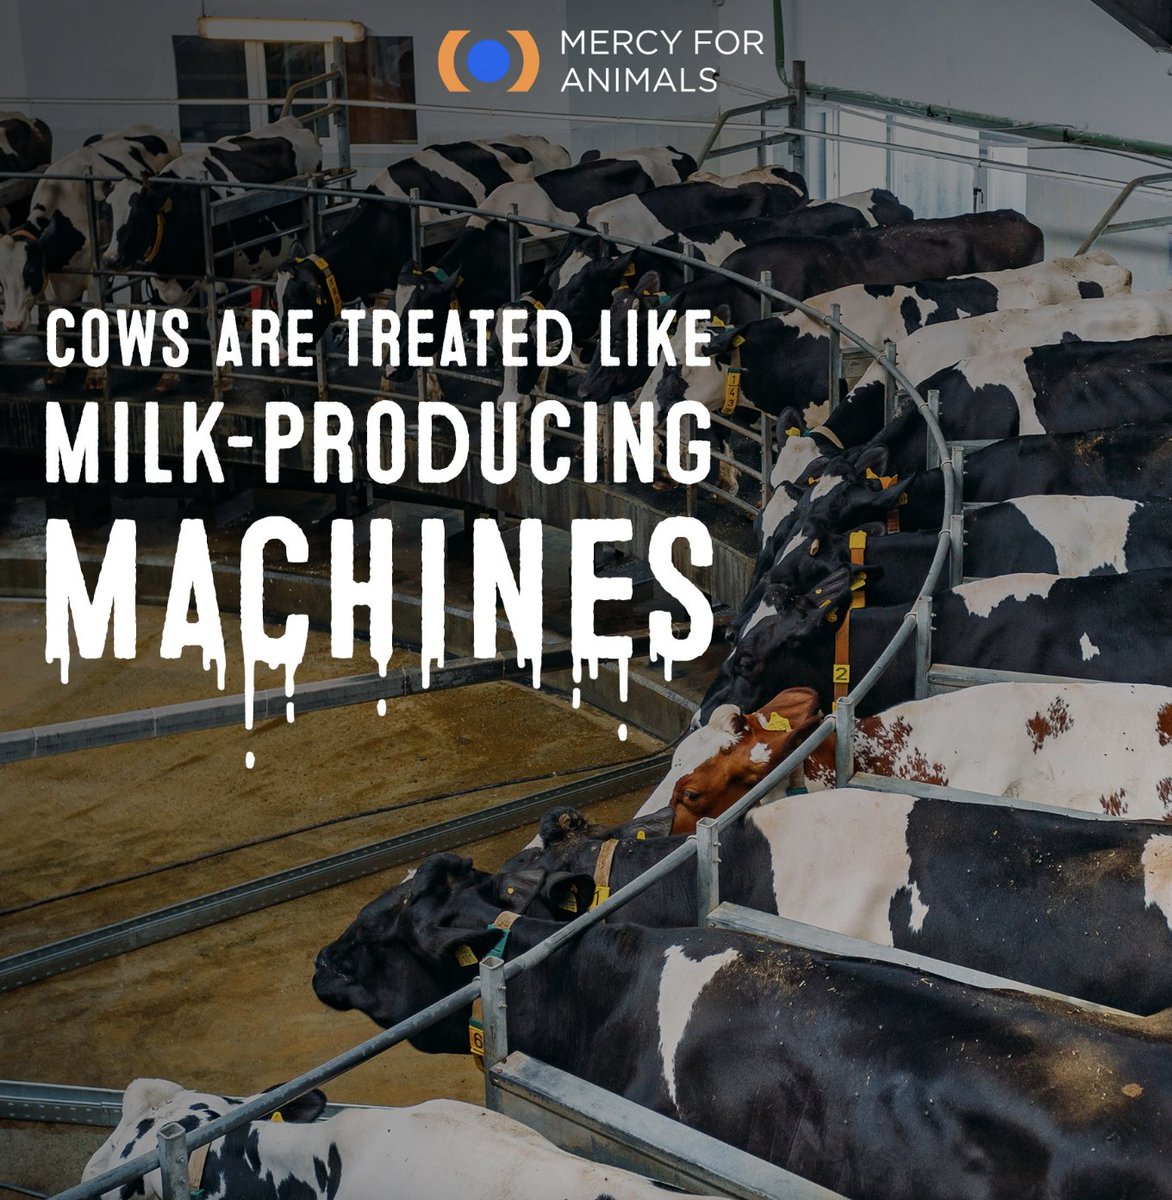 The dairy industry exploits cows until their bodies are exhausted and depleted. Then, they're slaughtered. Stand up against this abusive industry by enjoying more plant-based milk, cheese, and ice cream. 🌱 Want to do even more? Become an Animal Ally: mercyforanimals.org/animalally/